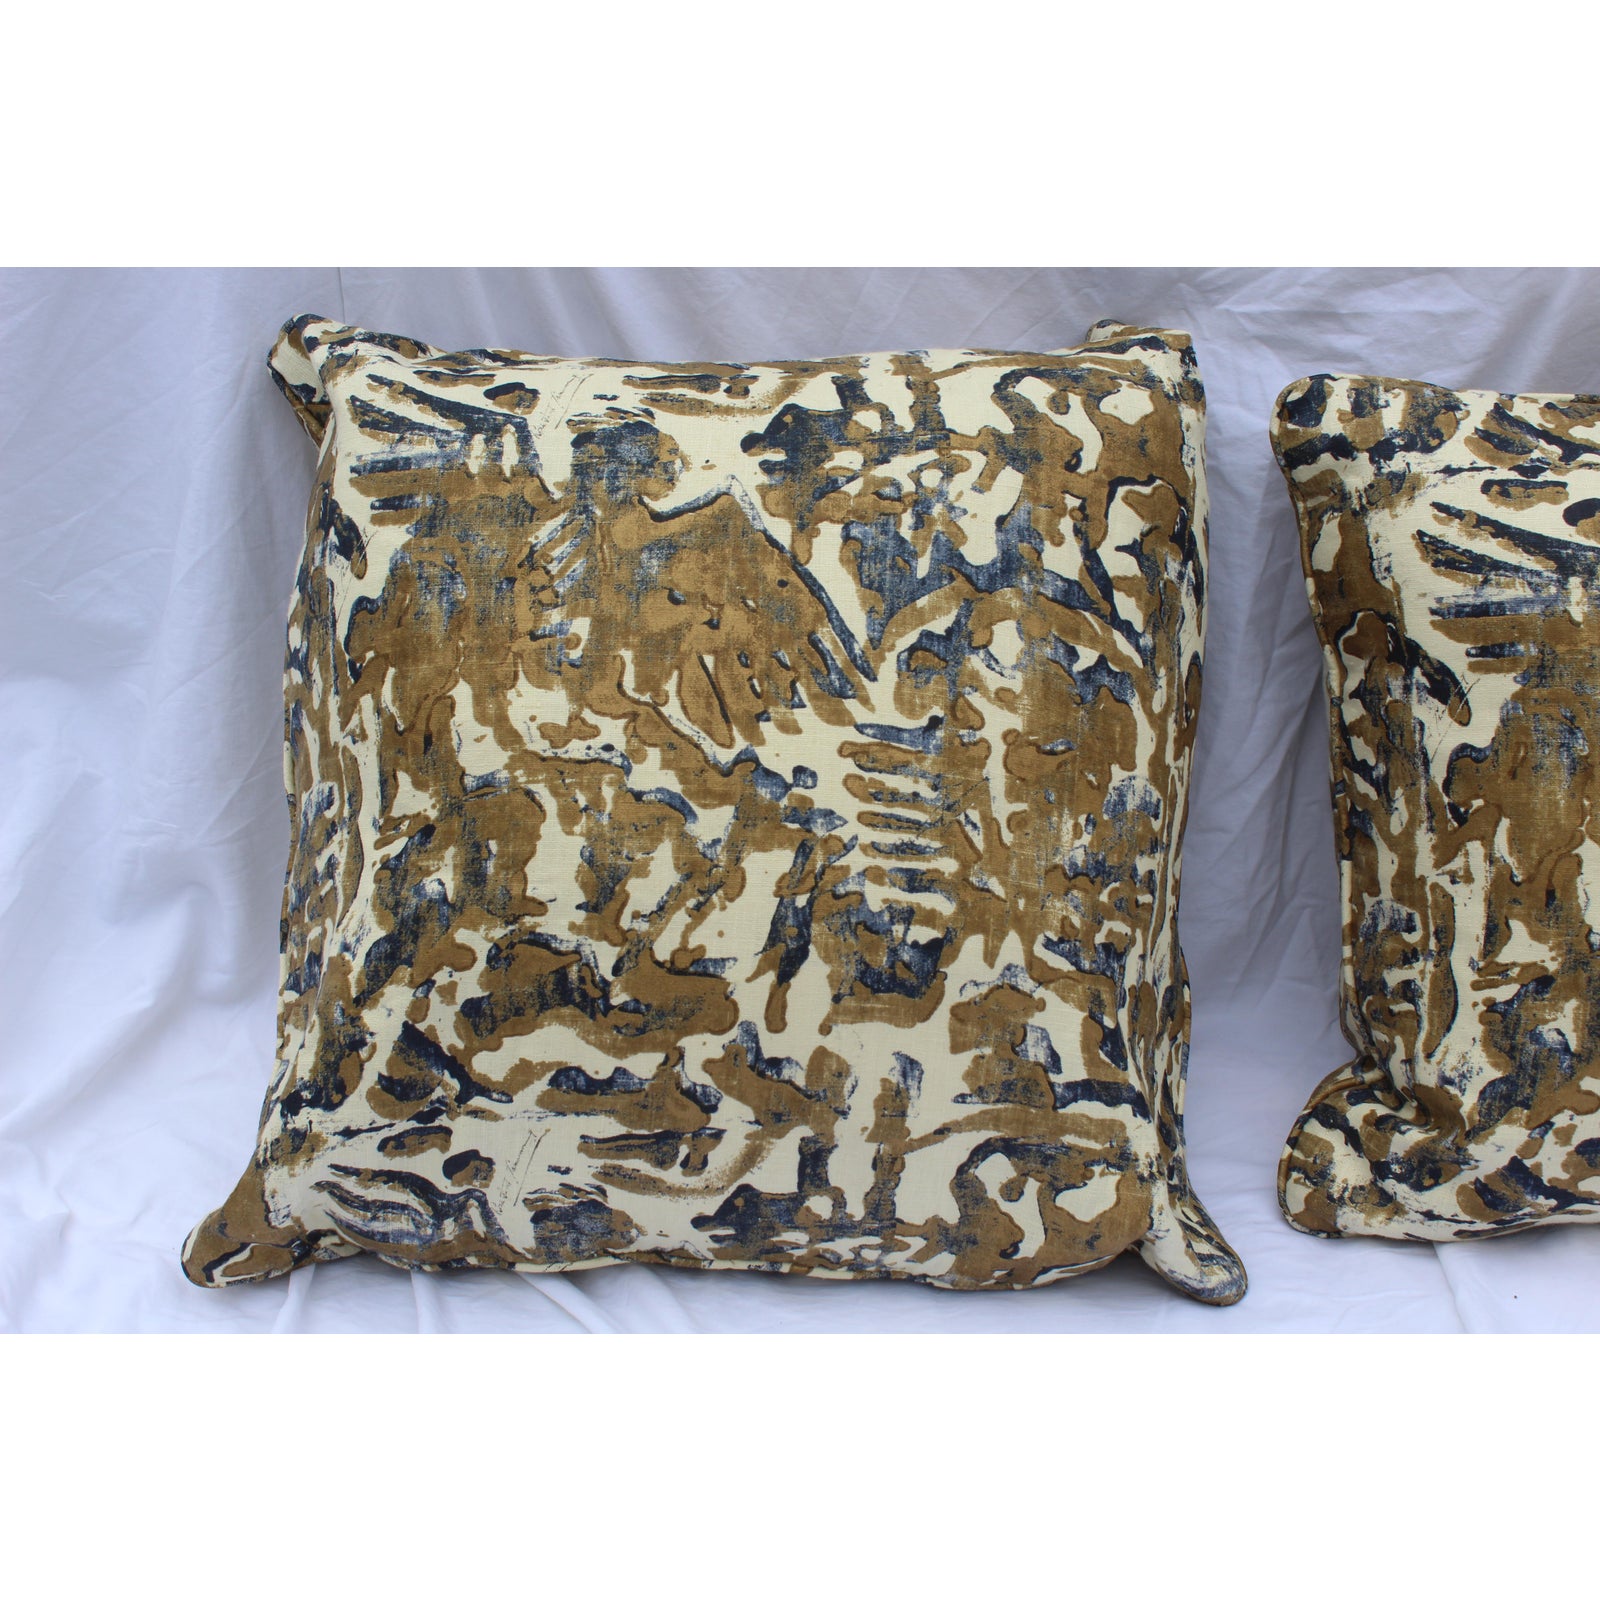 contemporary-printed-linen-navy-blue-and-bronze-down-pillows-a-pair-0230